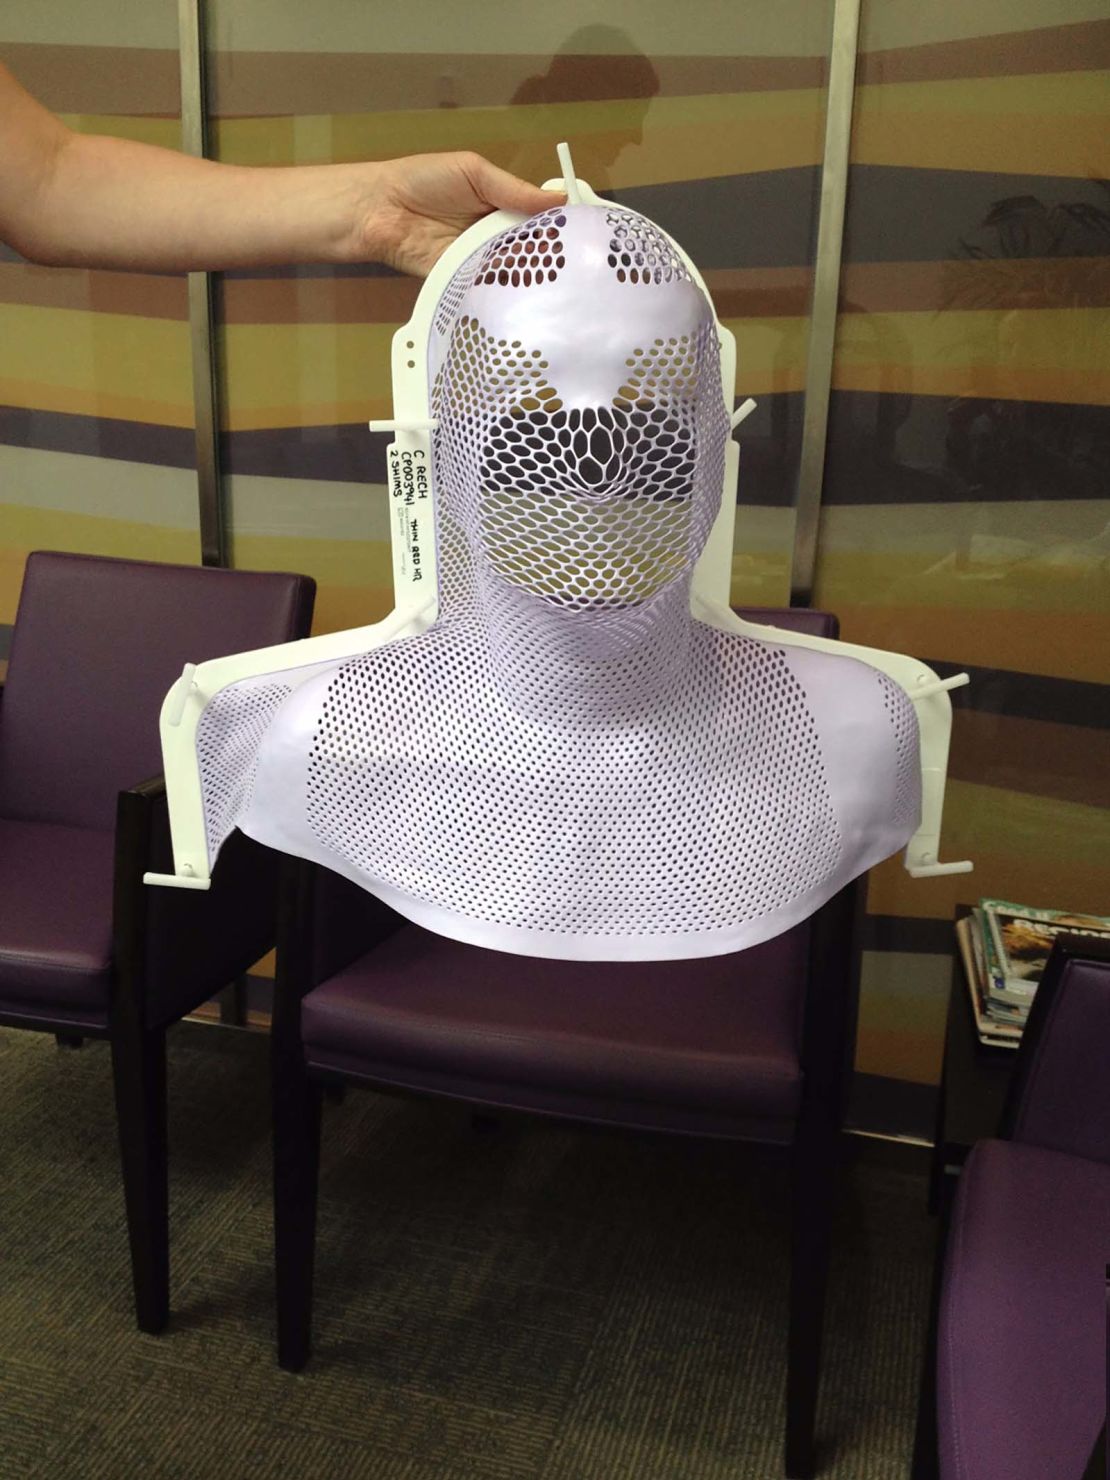 Phil Rech's radiotherapy mask was molded to his face.